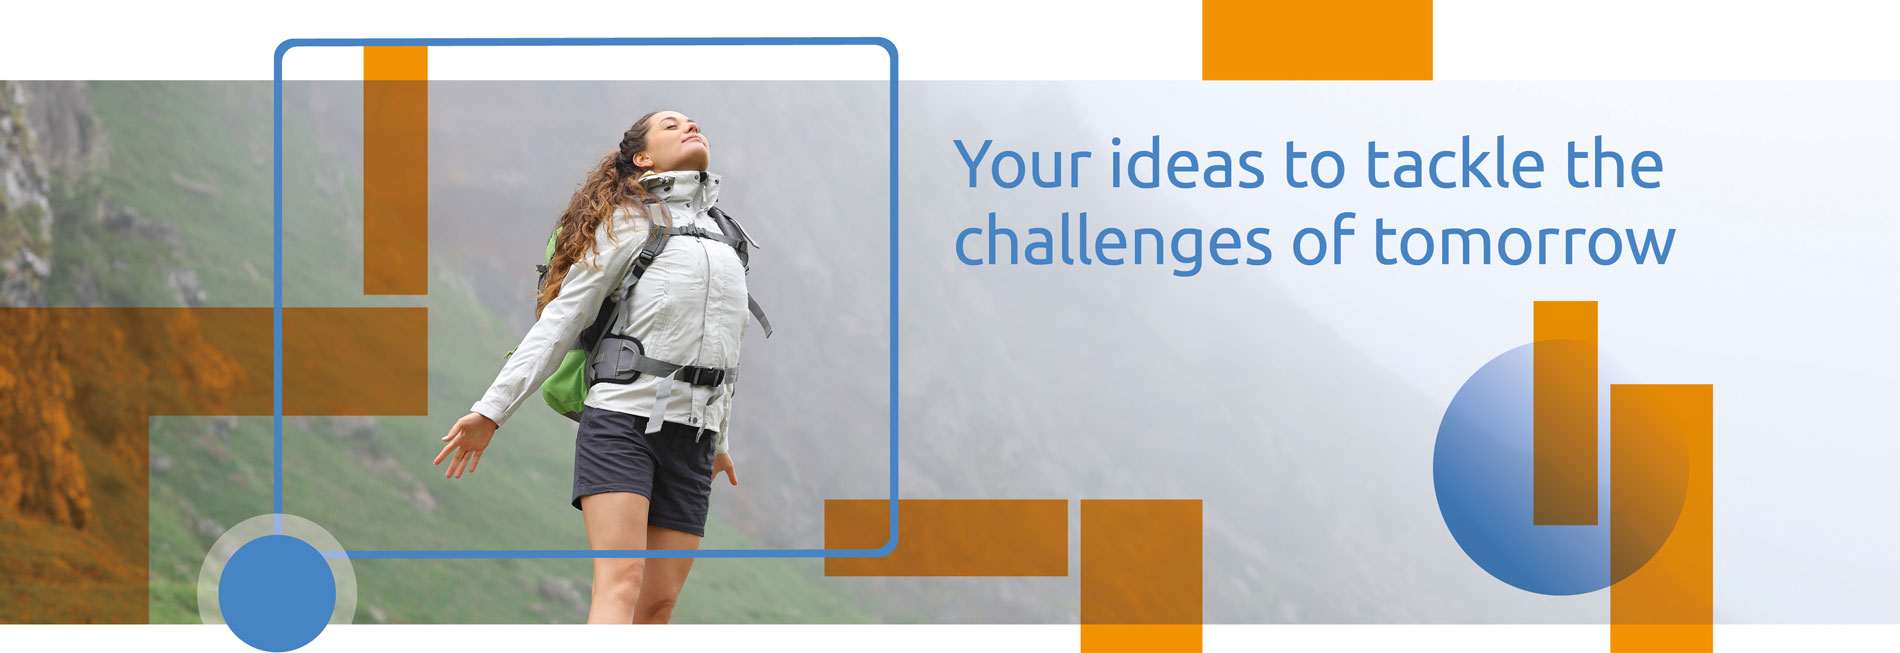 Your ideas to tackle the challenges of tomorrow